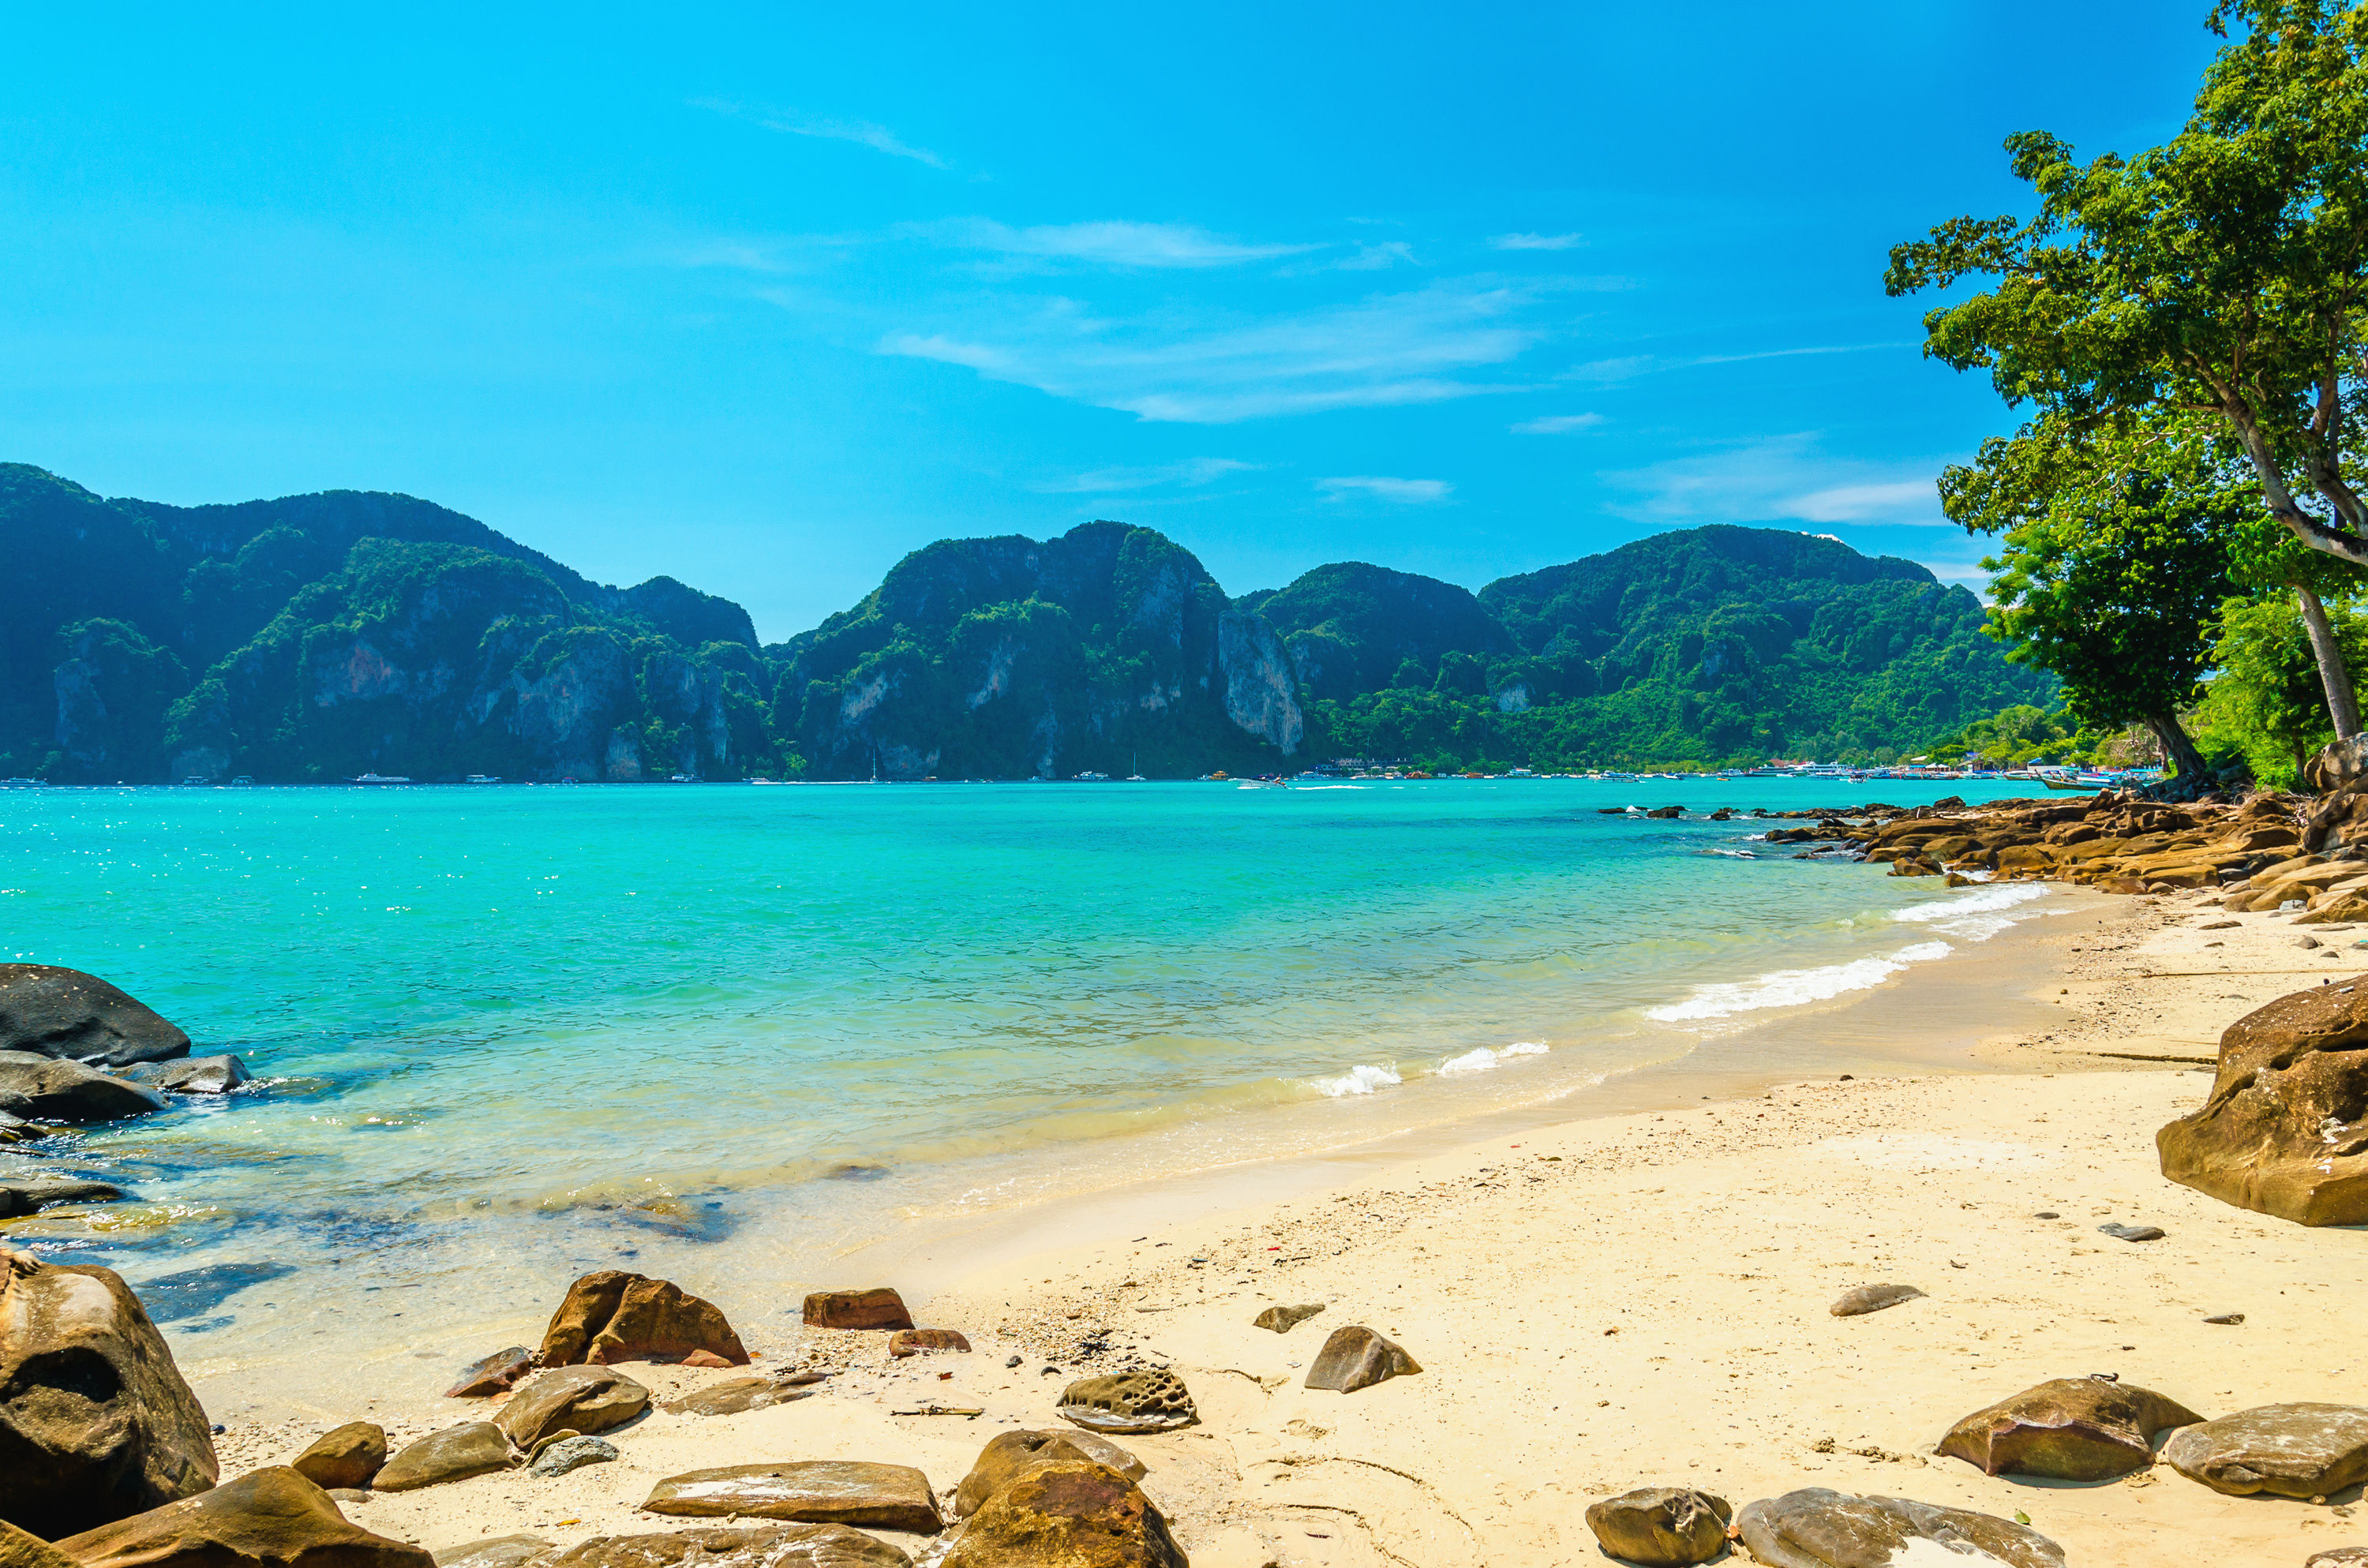 Sandy beach with trees, clear blue waters and green hills in the background.